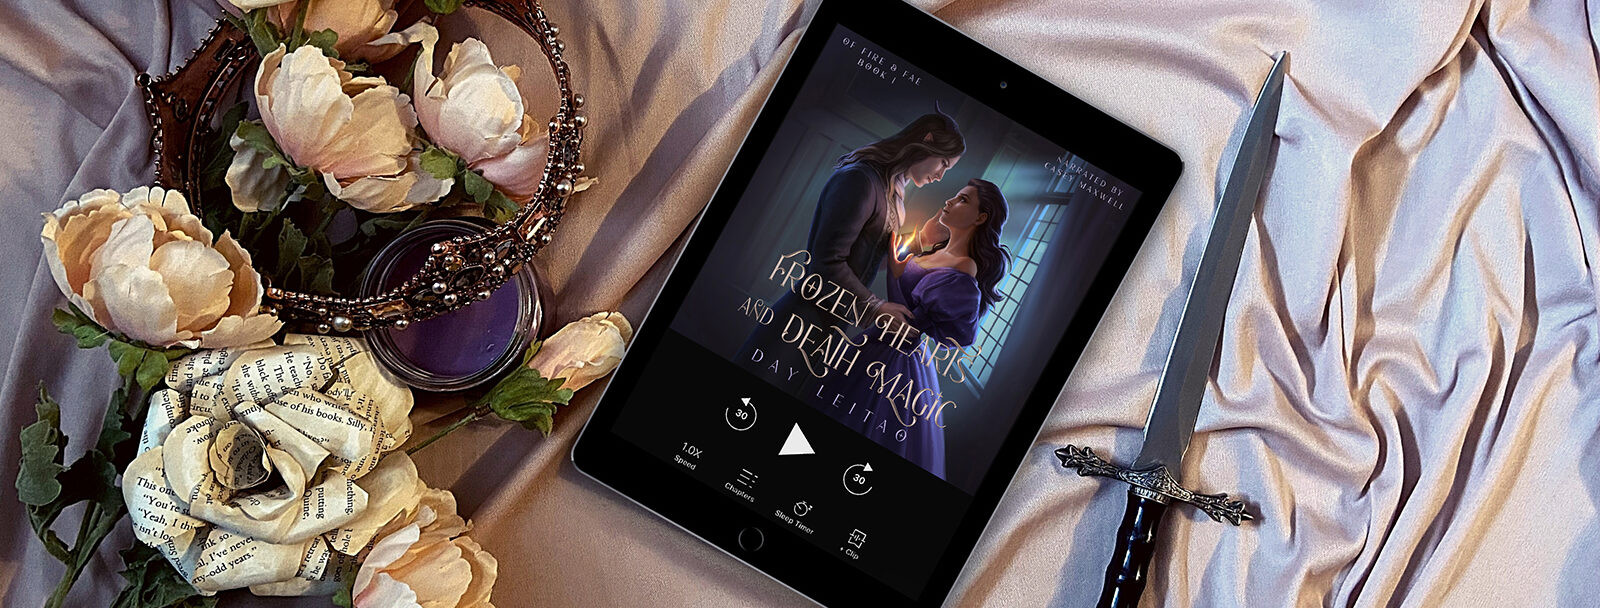 Frozen Hearts and Death Magic audiobook banner